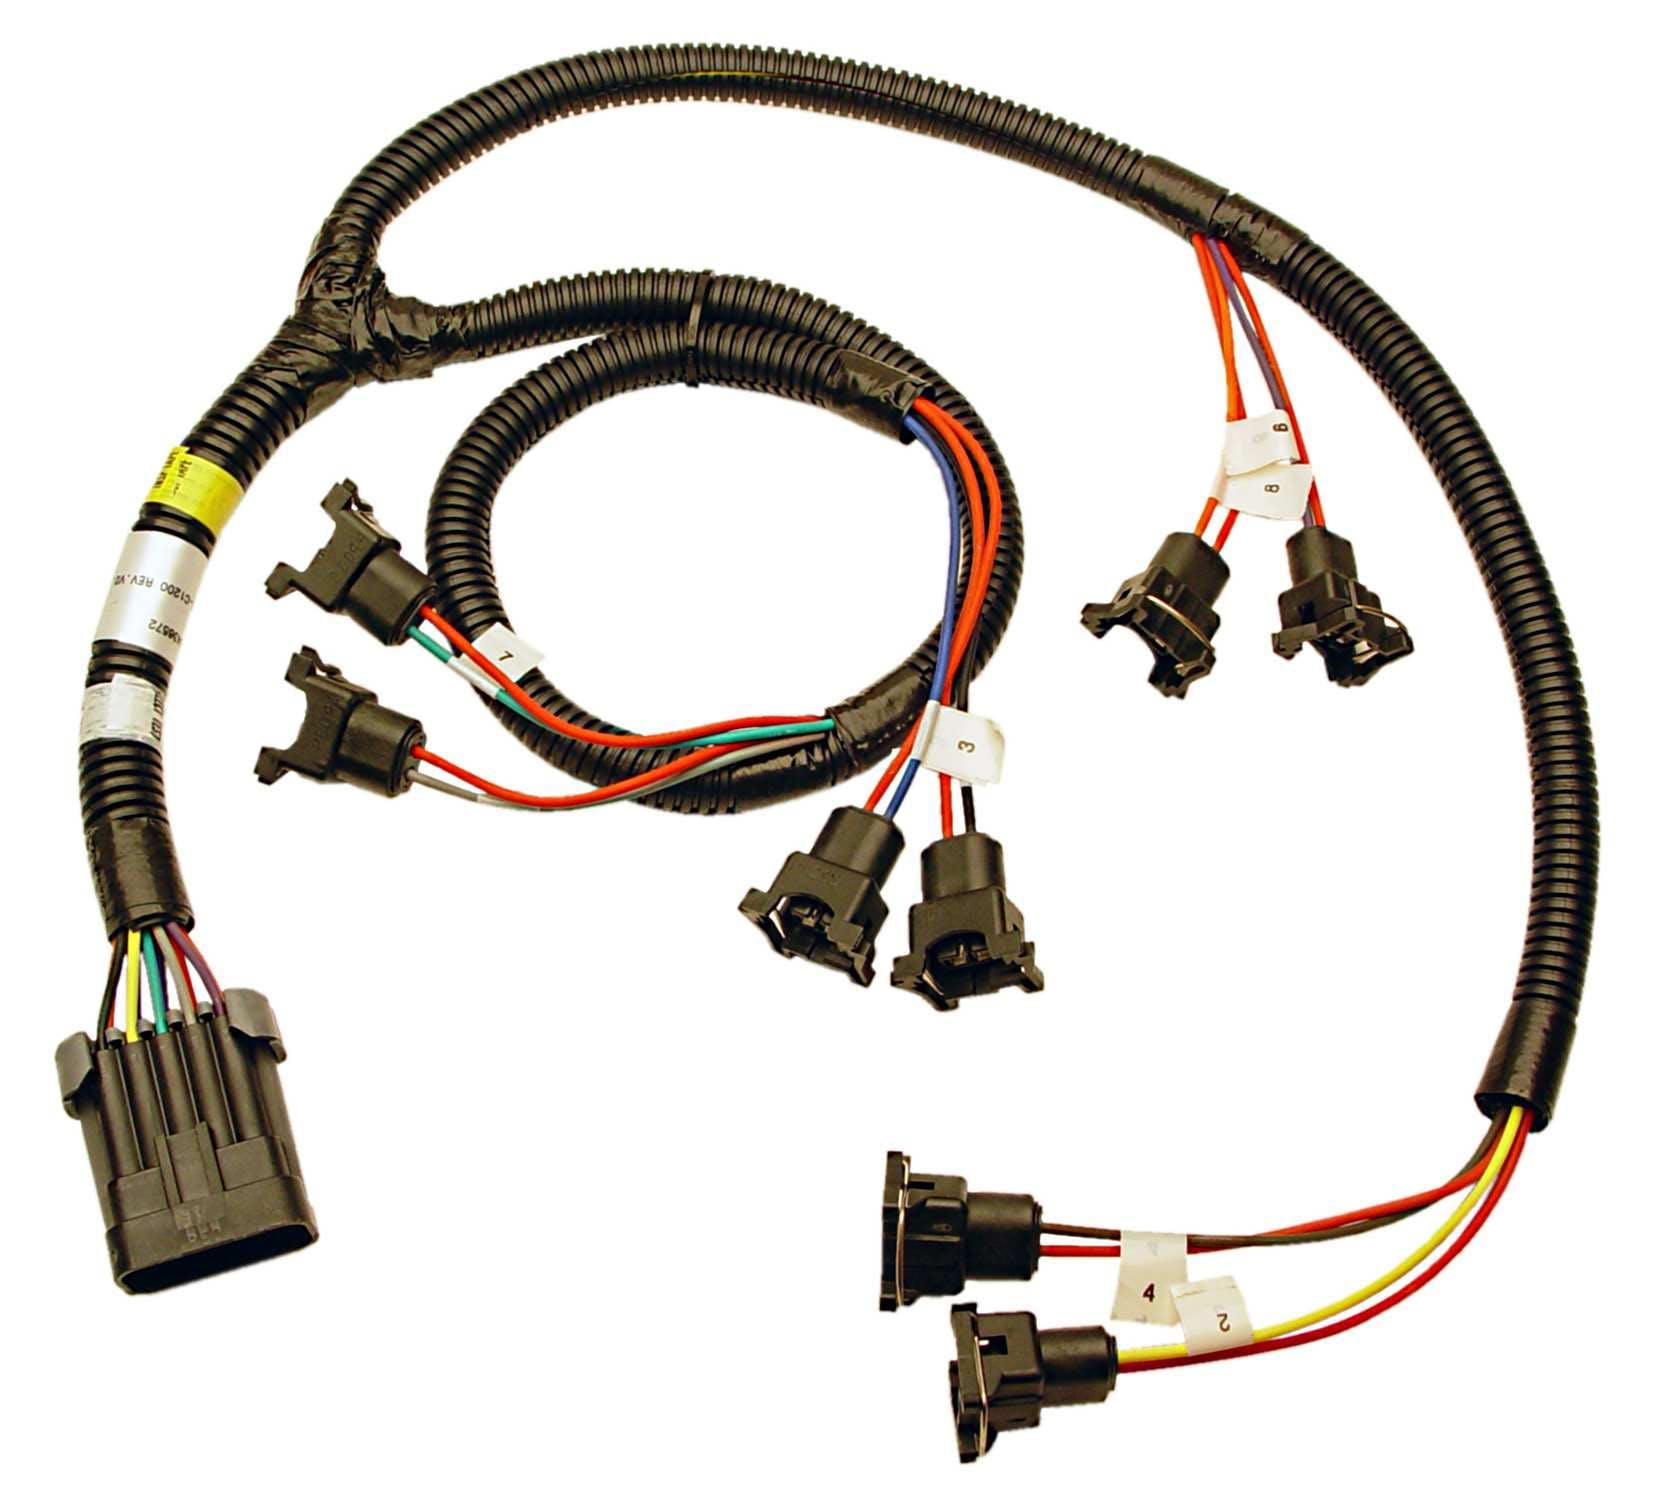 FAST - Fuel Air Spark Technology 301201 XFI Fuel Injector Harness for 4-7 Swap Firing Order SBC, BBC and LT1 engines.